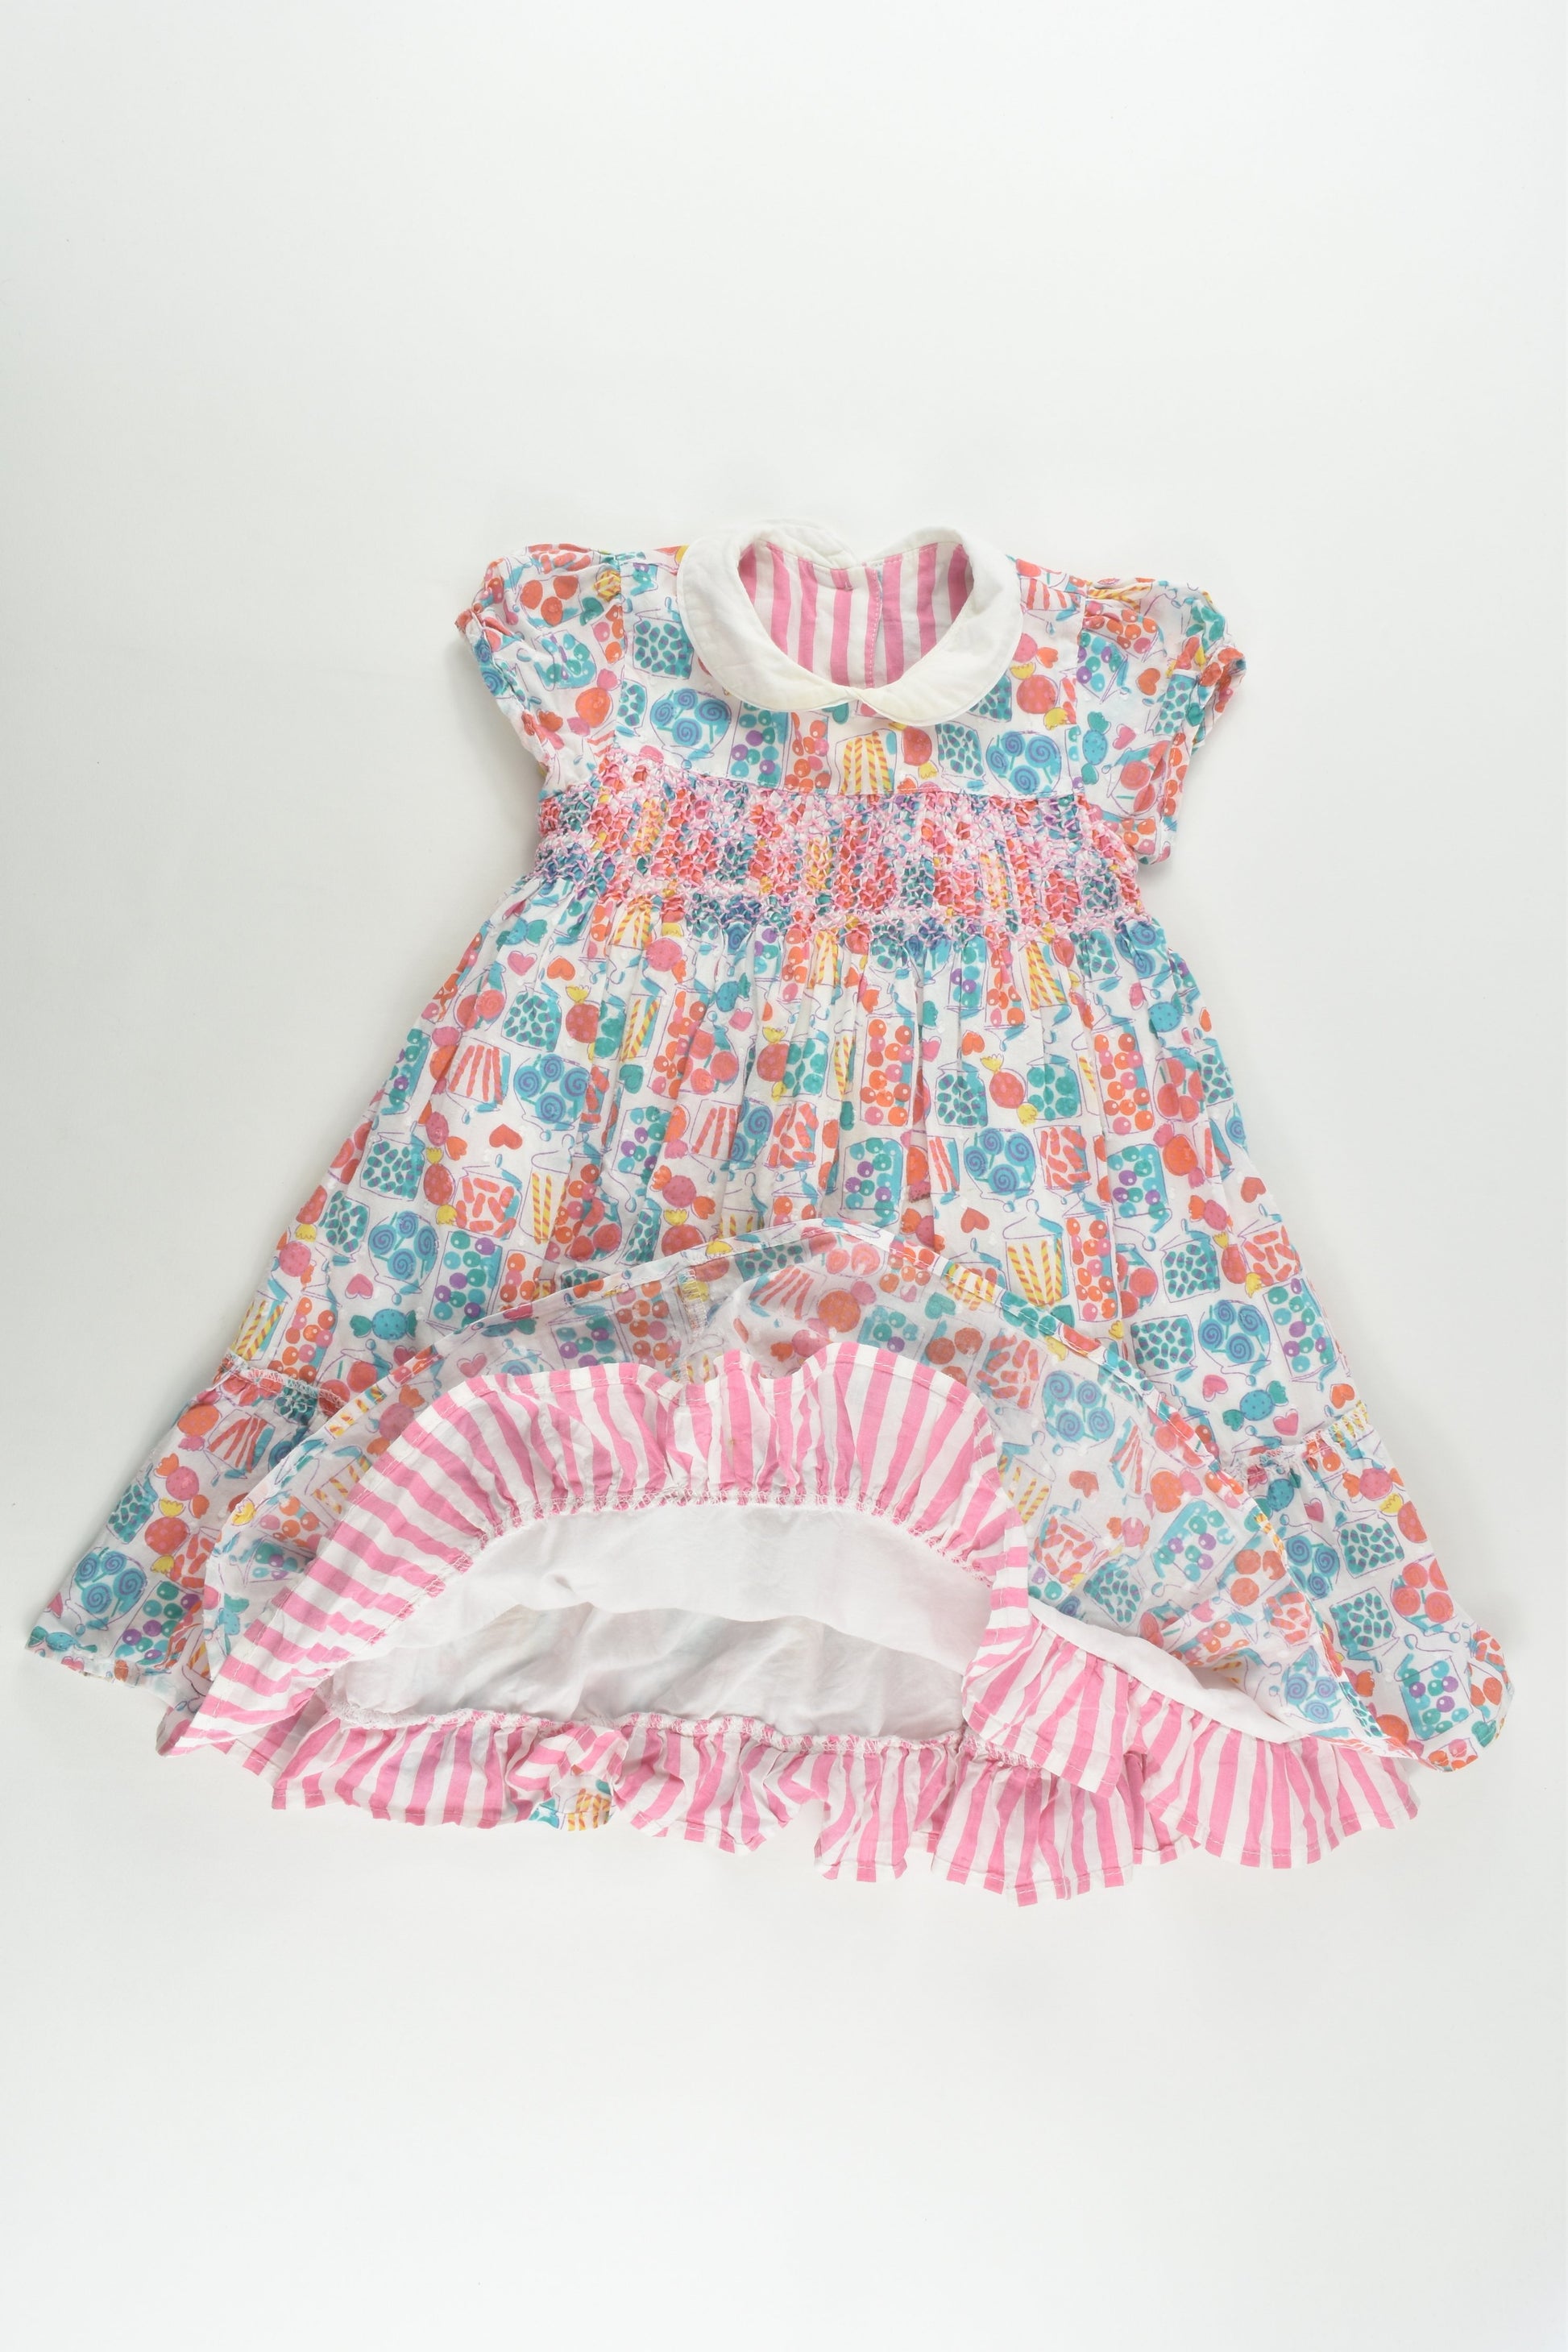 Indigo Baby by M&S Size 1 (12-18 months) Lollies Lined Smocked Dress